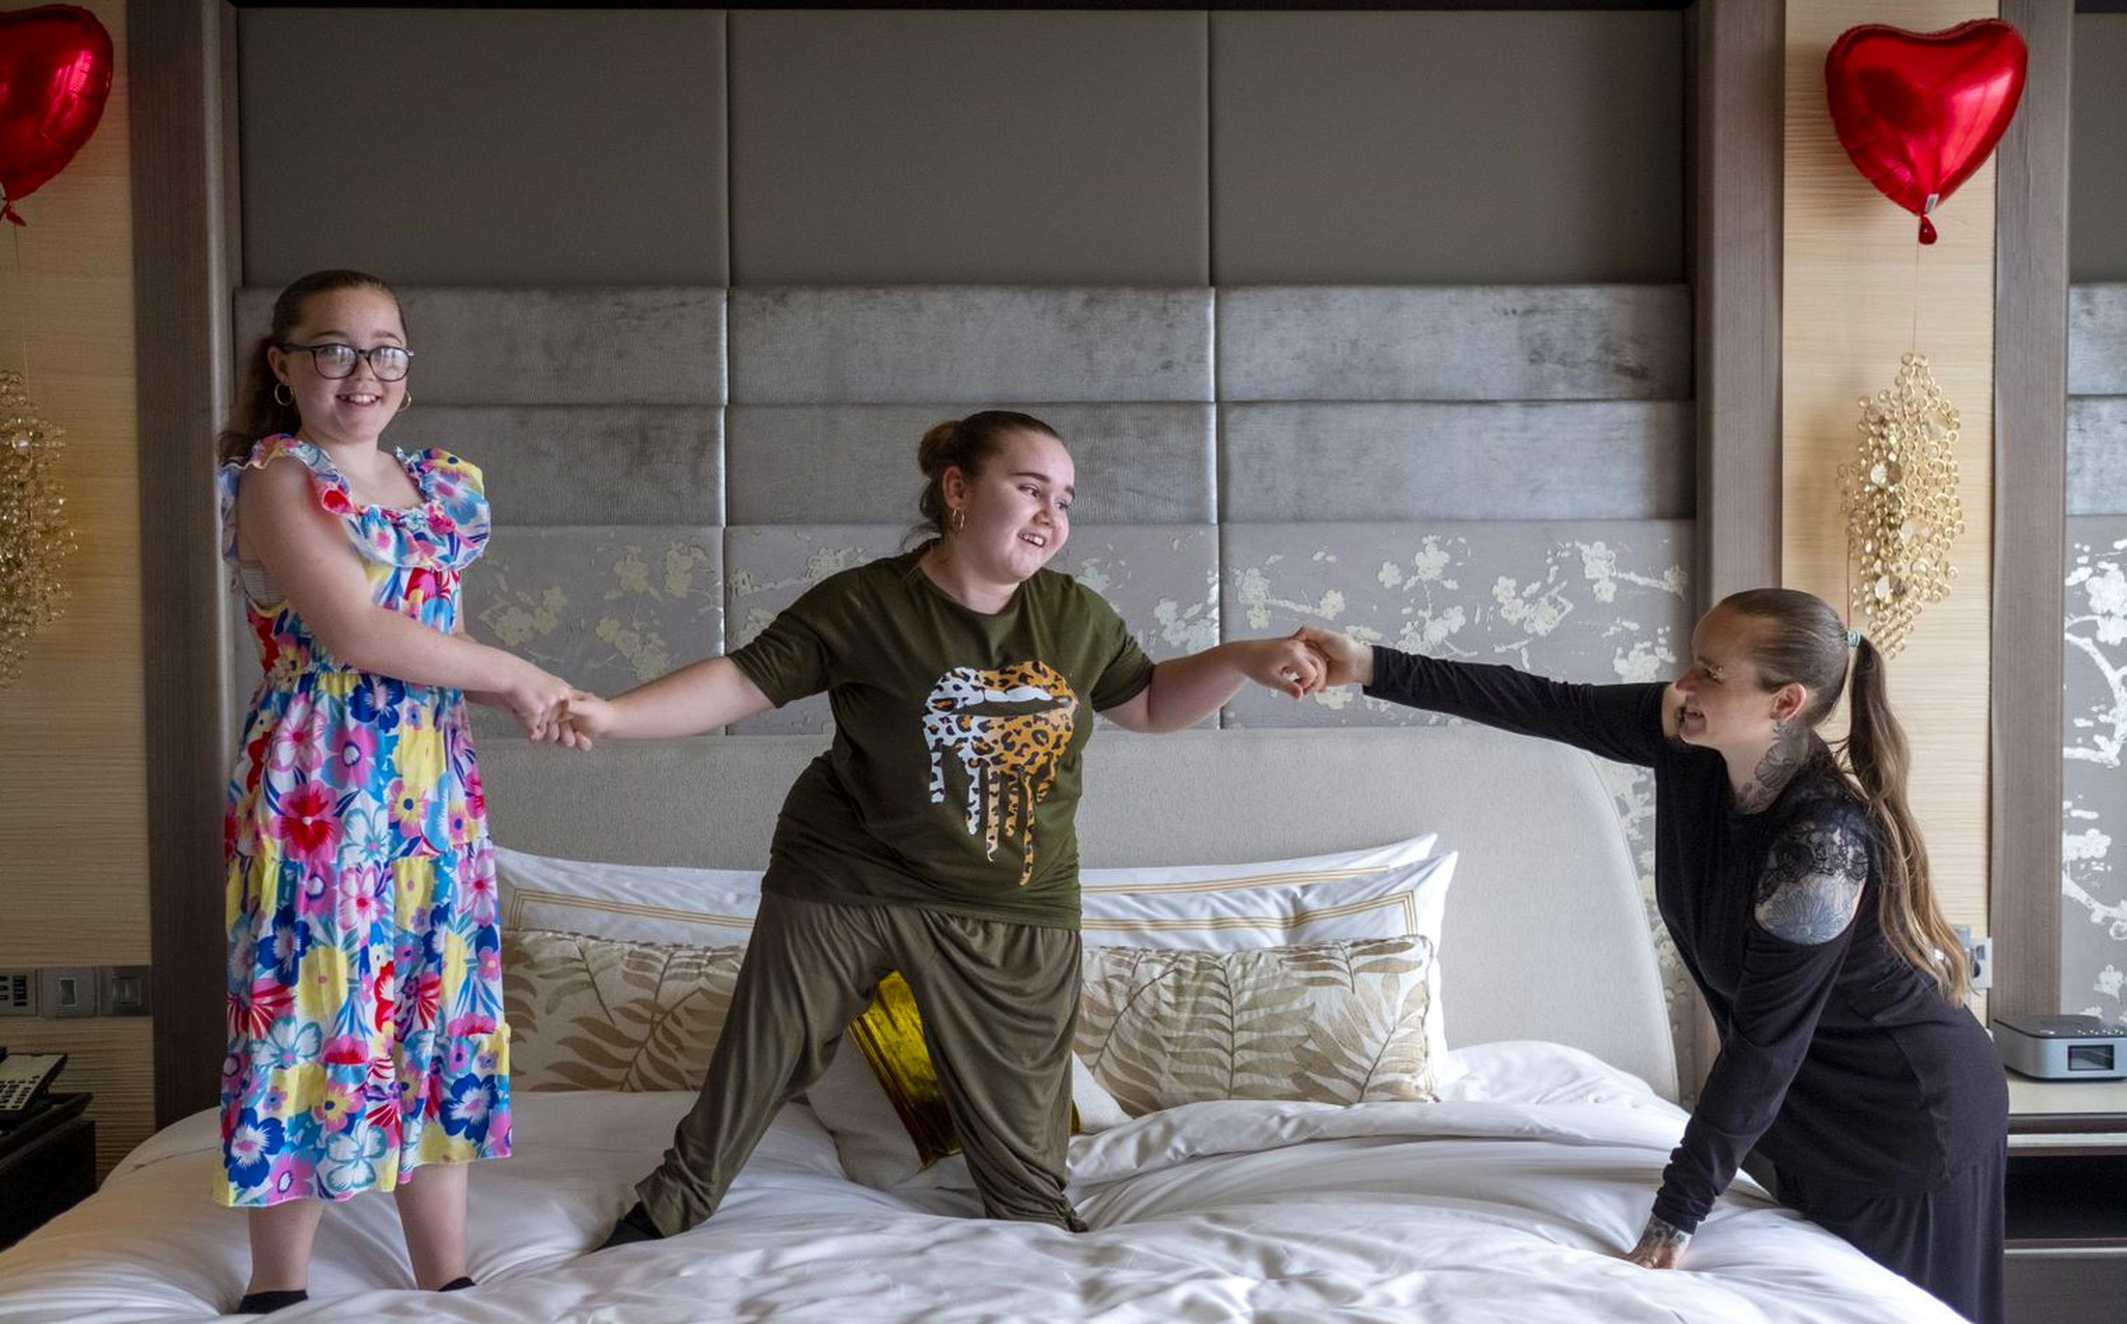 Angel jumping on the bed with her sister and mum.